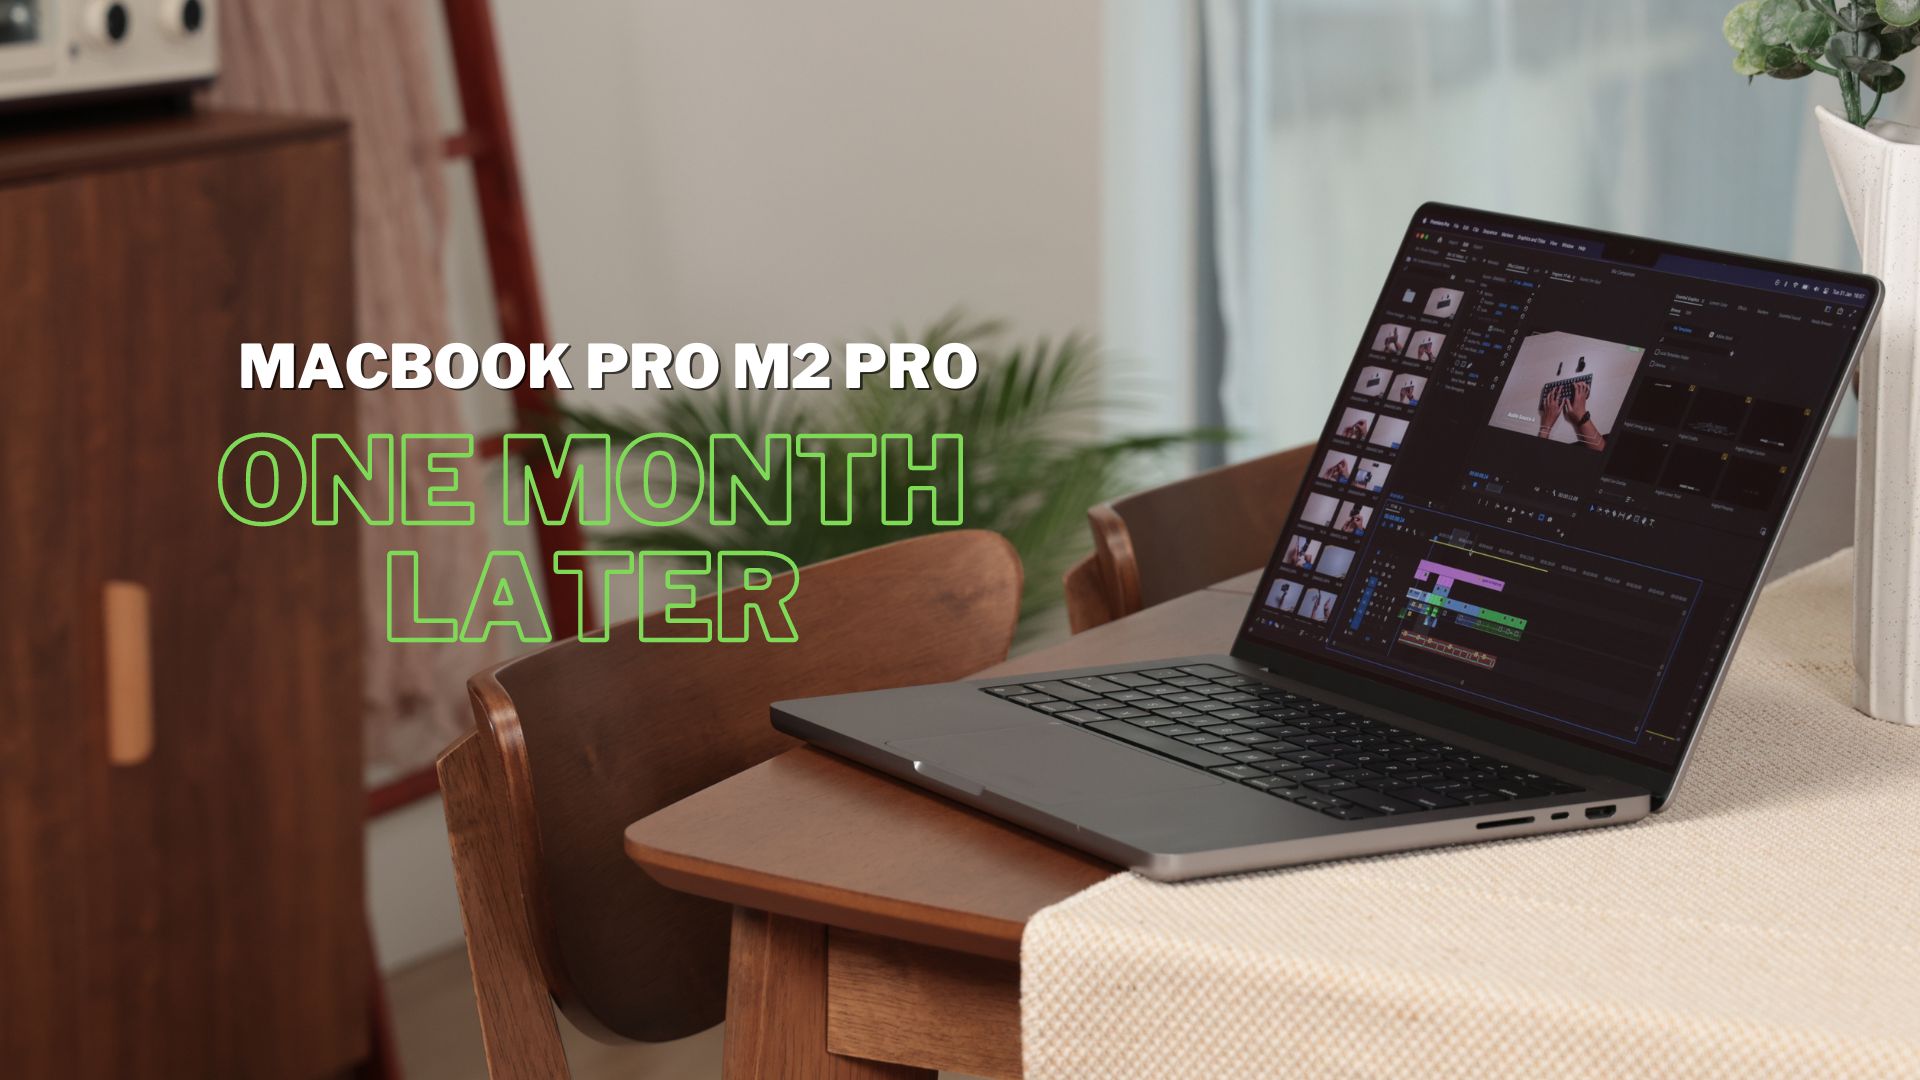 Macbook Pro 14" M2 Pro Review - One Month Later